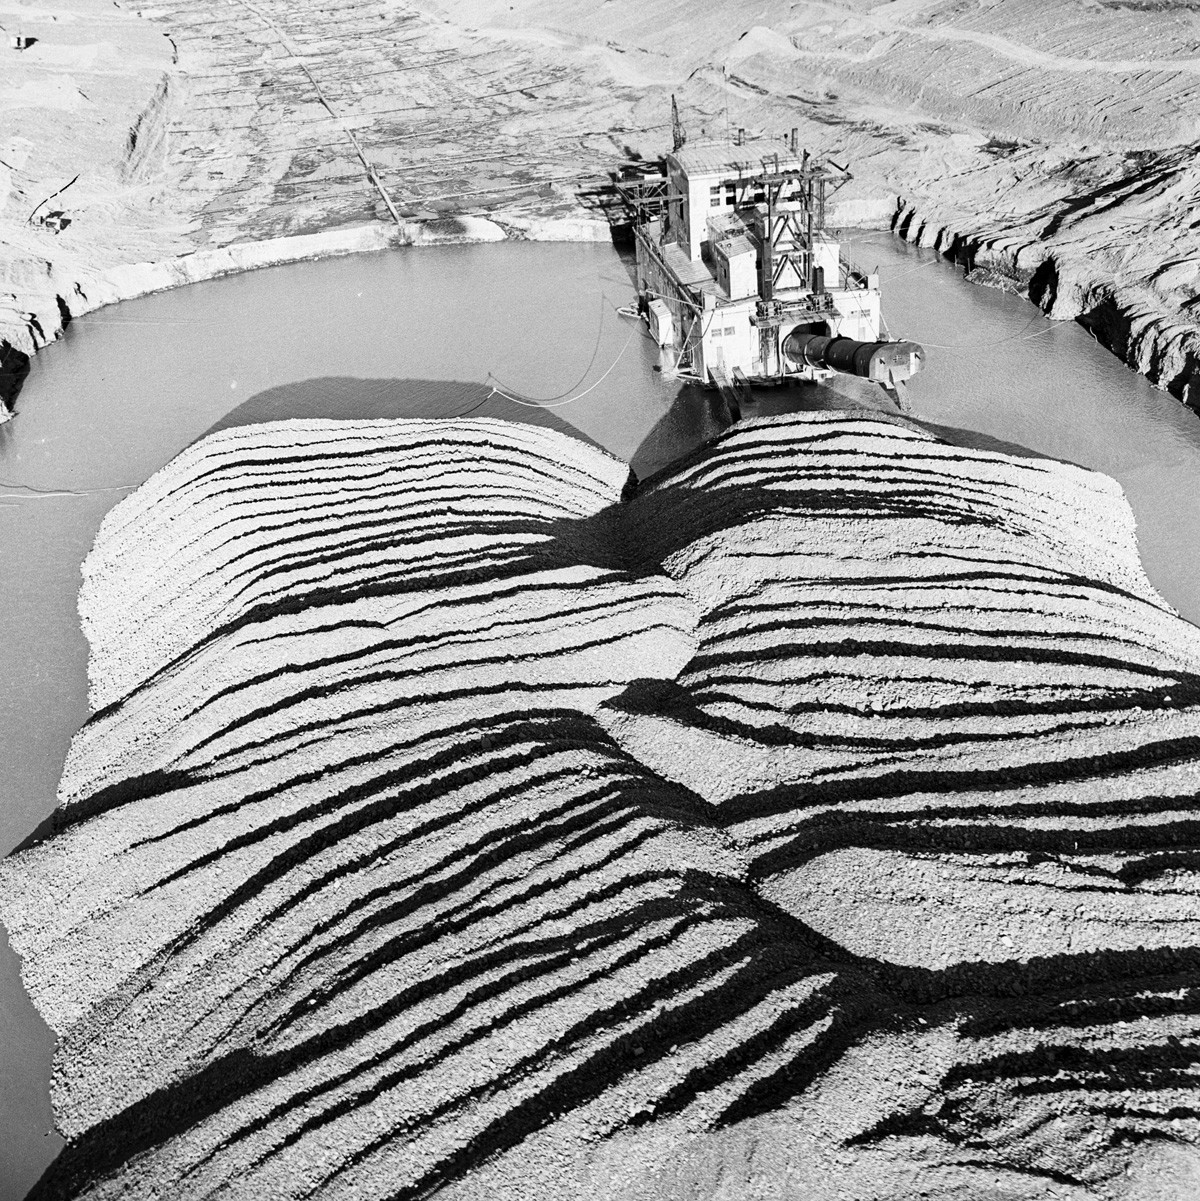 A dredge in the Aliskerov Gold Field near the city of Bilibino on the Kolyma River, Magadan Region, having a processing capacity of several thousand tons of gold dust per day and replacing hundreds of workers. 1964. - - 